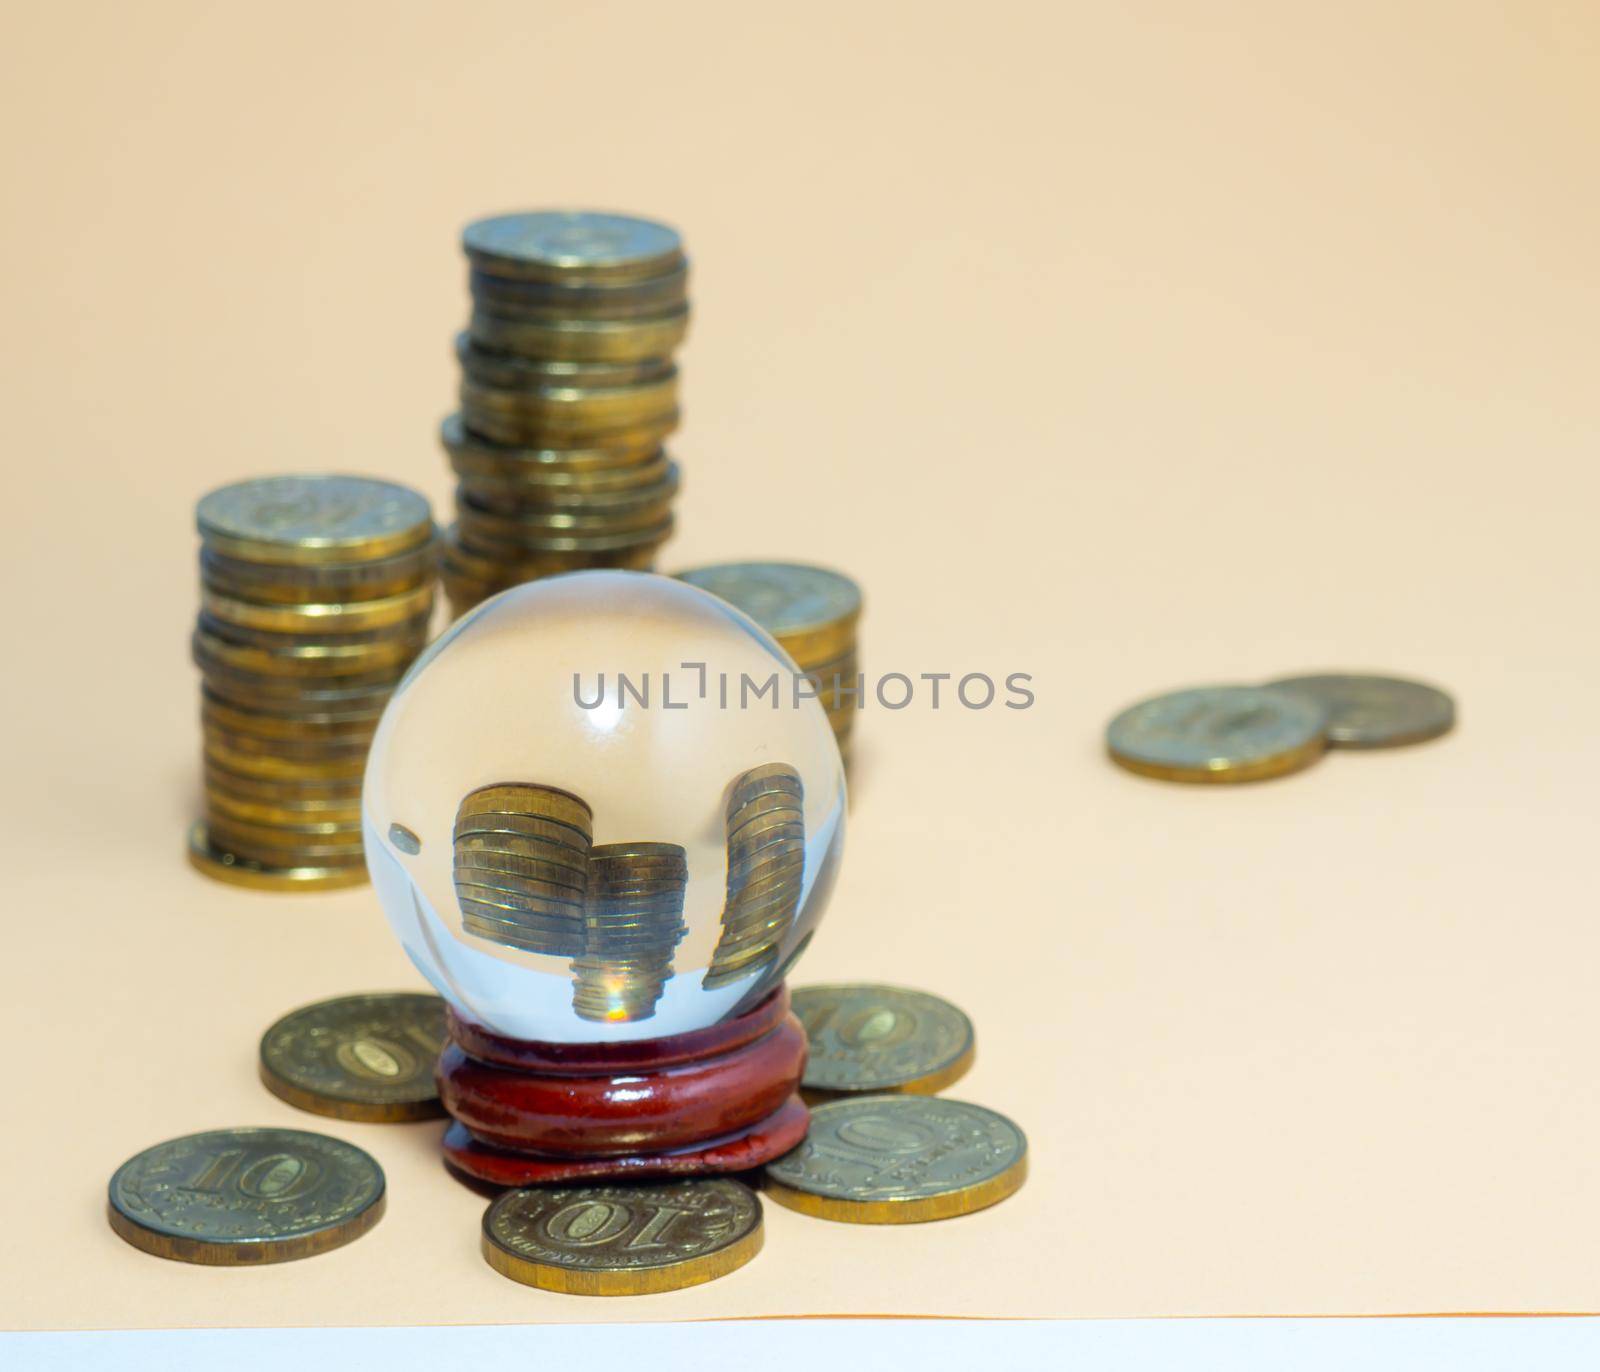 Pyramids of coins are reflected in a glass ball. by Puludi